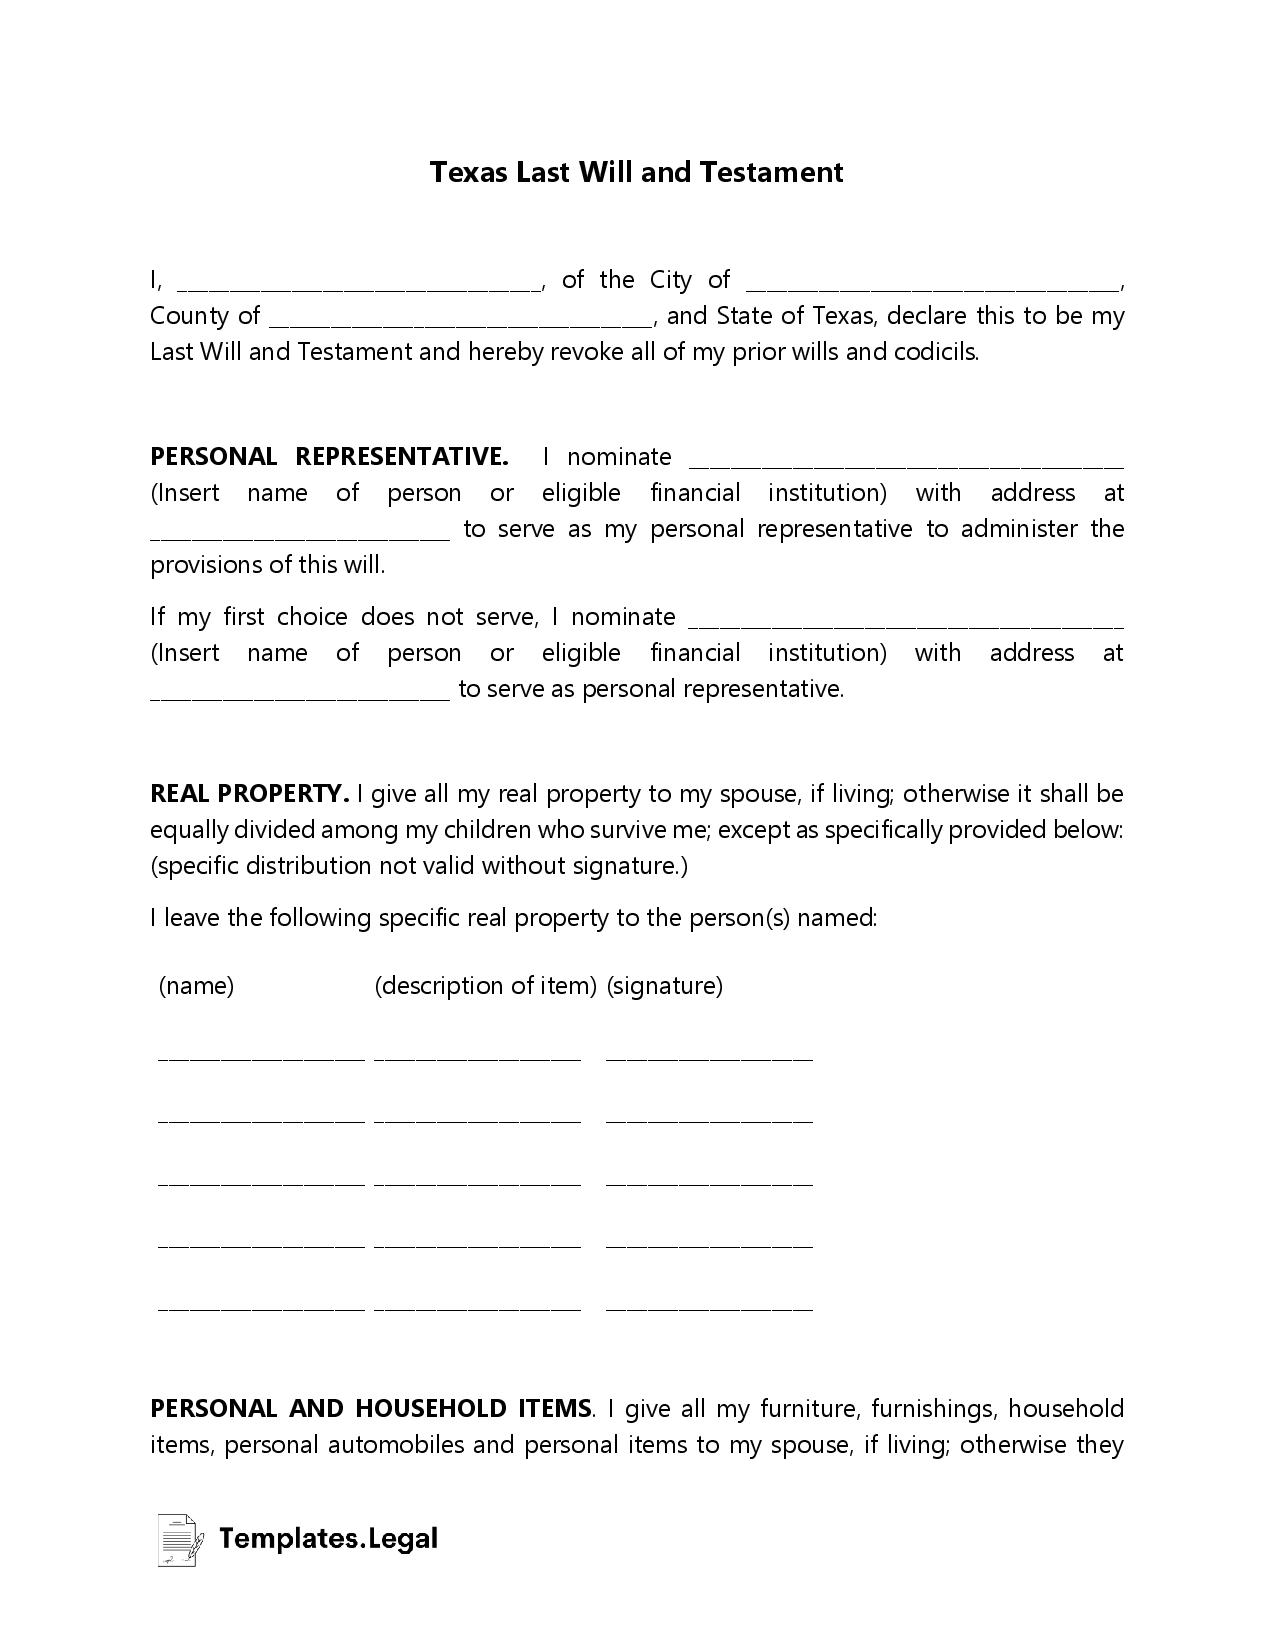 Texas Last Will and Testament - Templates.Legal